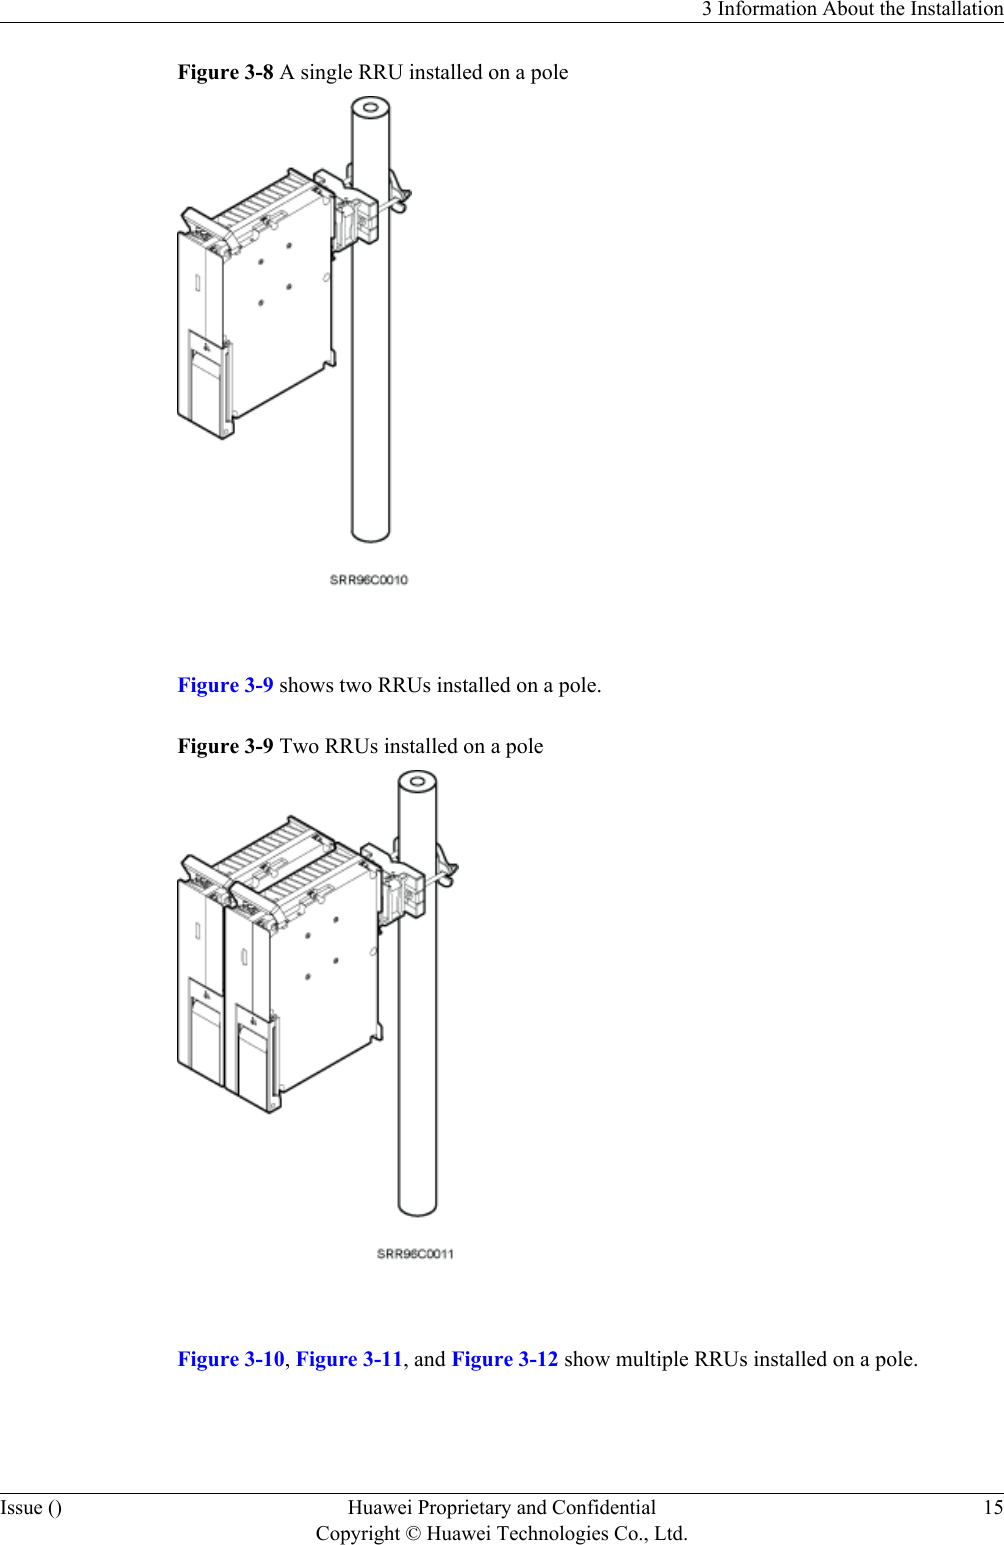 Figure 3-8 A single RRU installed on a pole Figure 3-9 shows two RRUs installed on a pole.Figure 3-9 Two RRUs installed on a pole Figure 3-10, Figure 3-11, and Figure 3-12 show multiple RRUs installed on a pole.3 Information About the InstallationIssue () Huawei Proprietary and ConfidentialCopyright © Huawei Technologies Co., Ltd.15